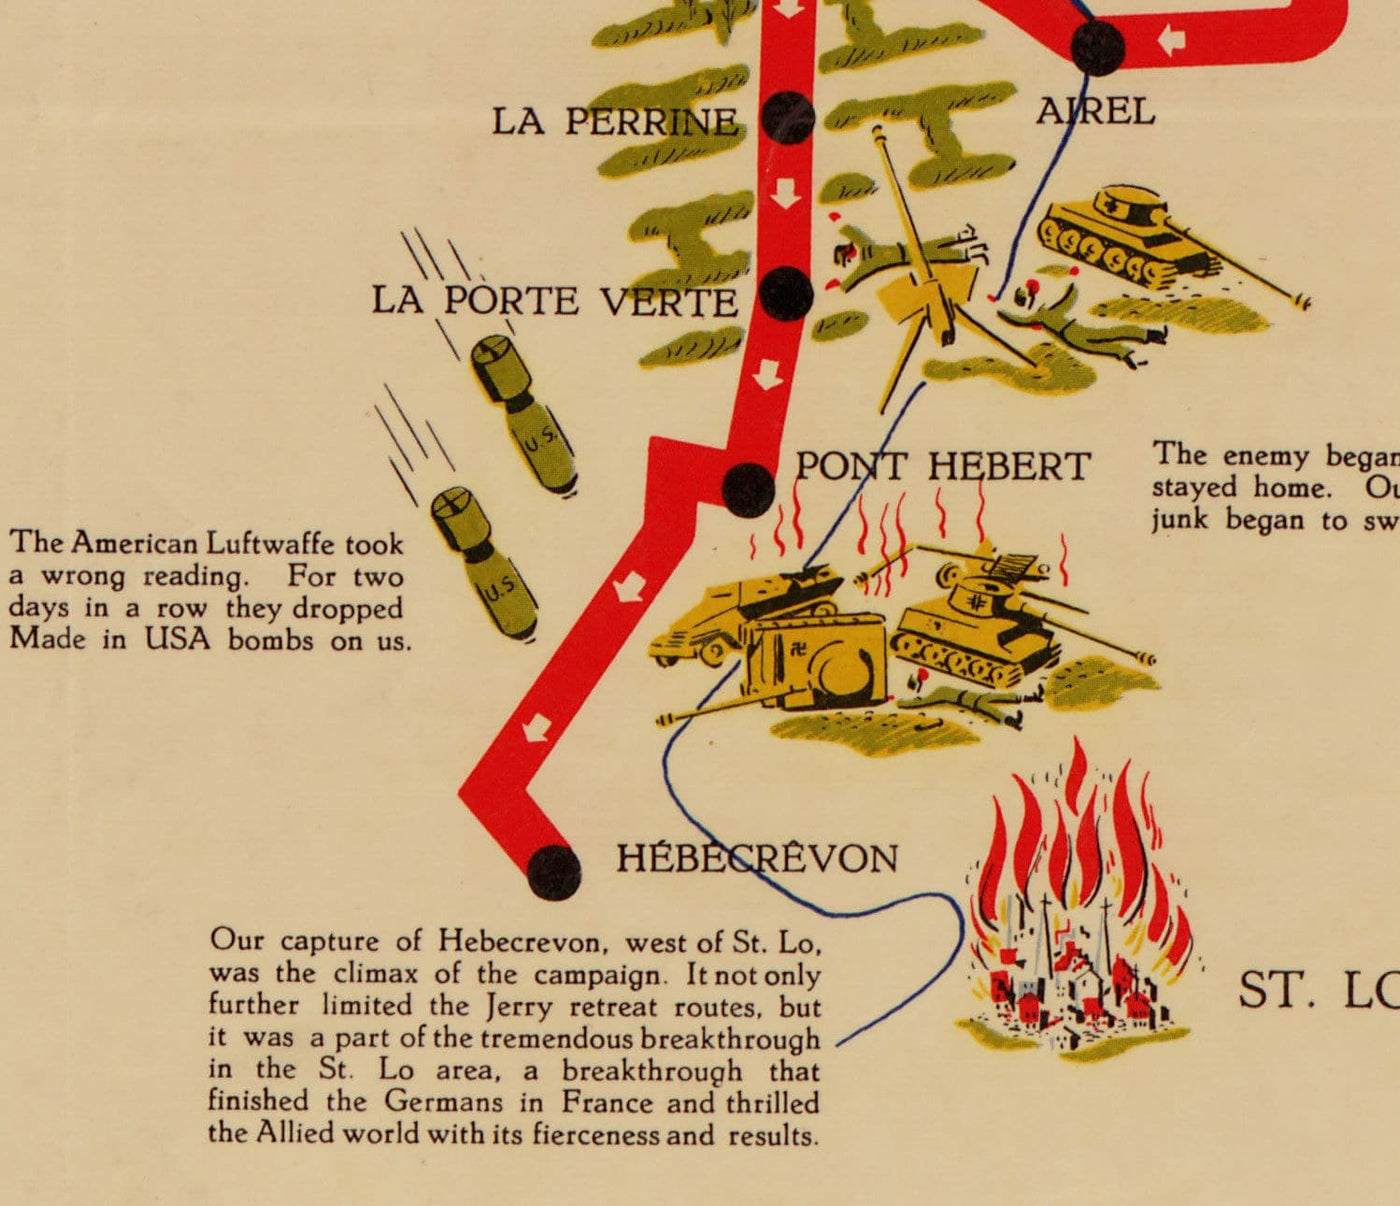 Old Map of D Day Landings in Normandy, 1944 - 743rd Tank Battalion in Northern France - US Army World War 2